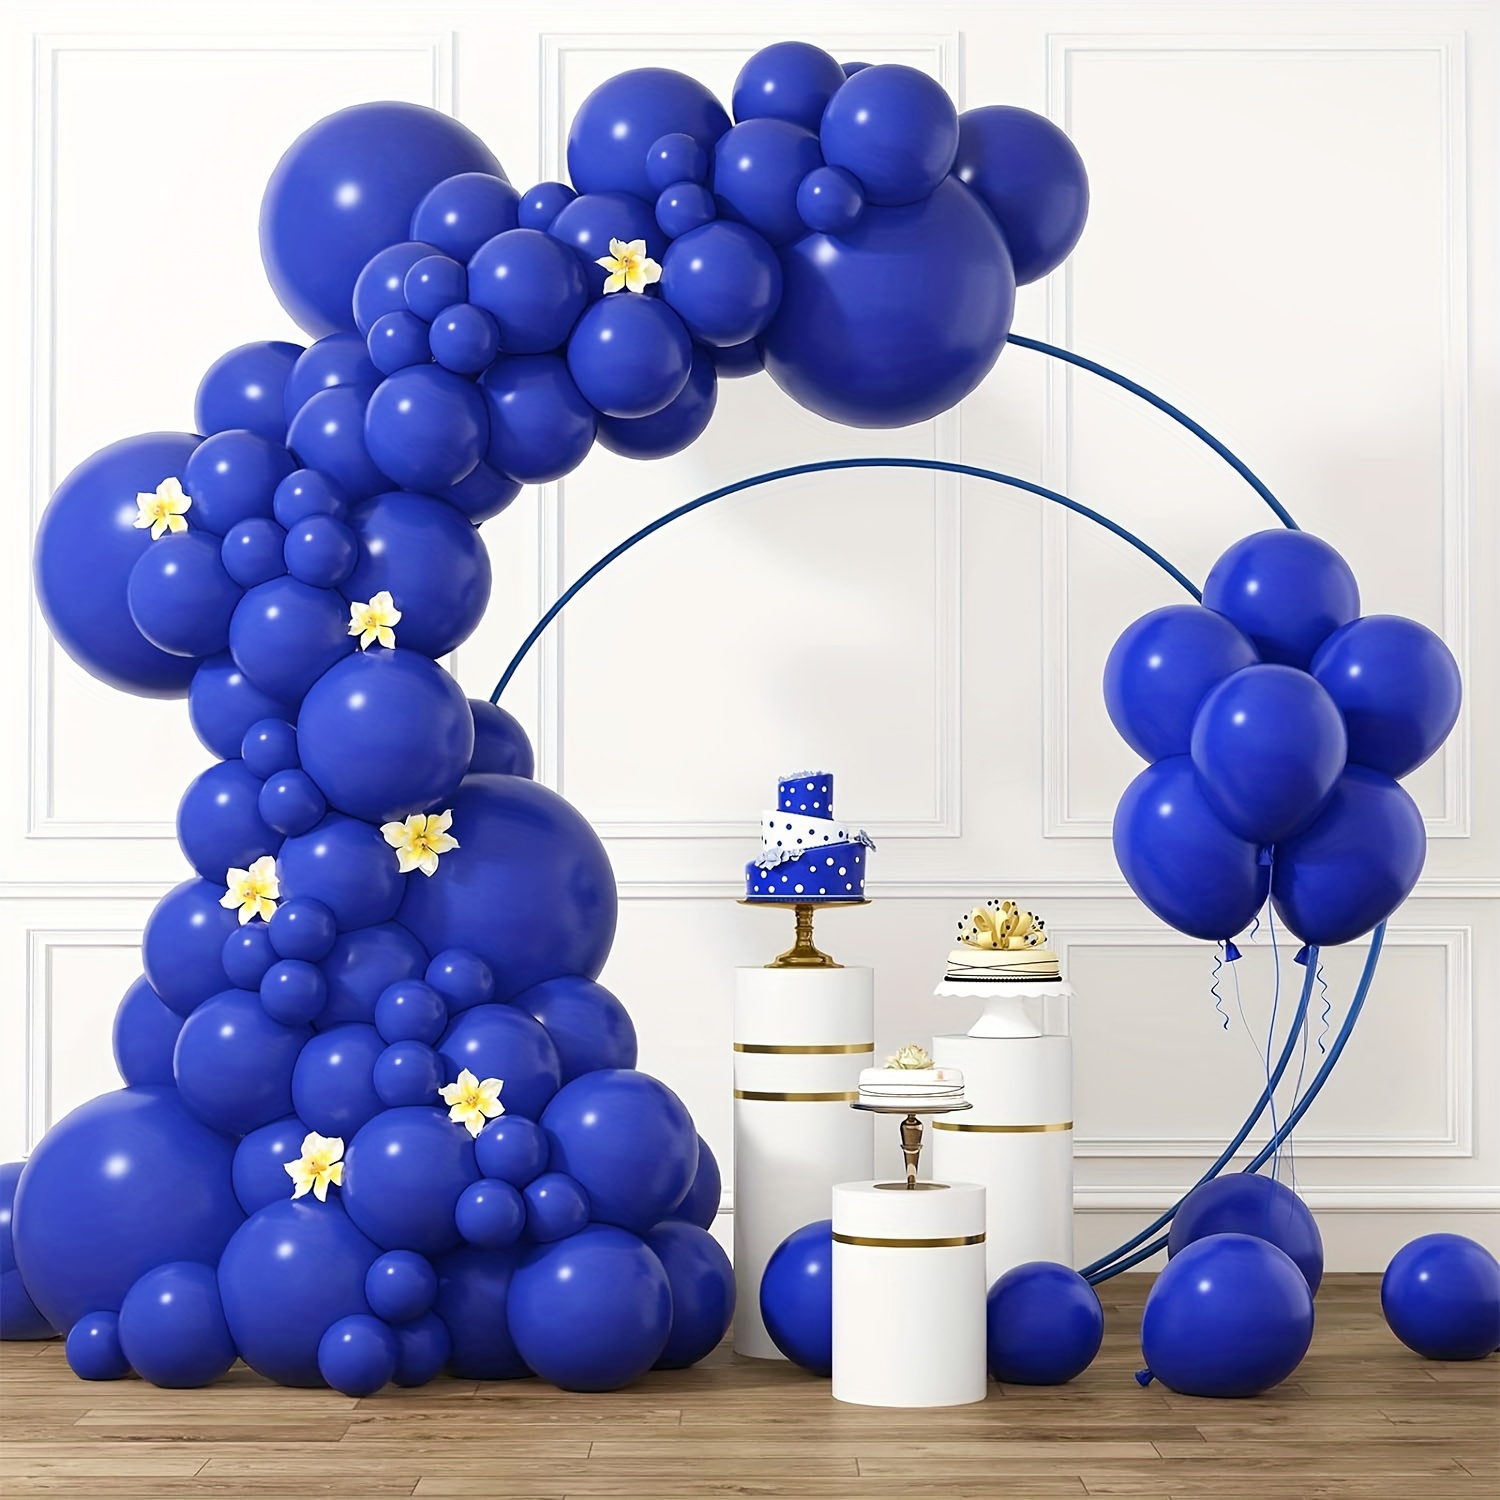 

110pcs Royal Blue Latex Balloon Set For Birthday Party Decoration Graduation Festival Party Bridal Shower Christmas Halloween Valentine's Day Mother's Day Various Festivals Holidays